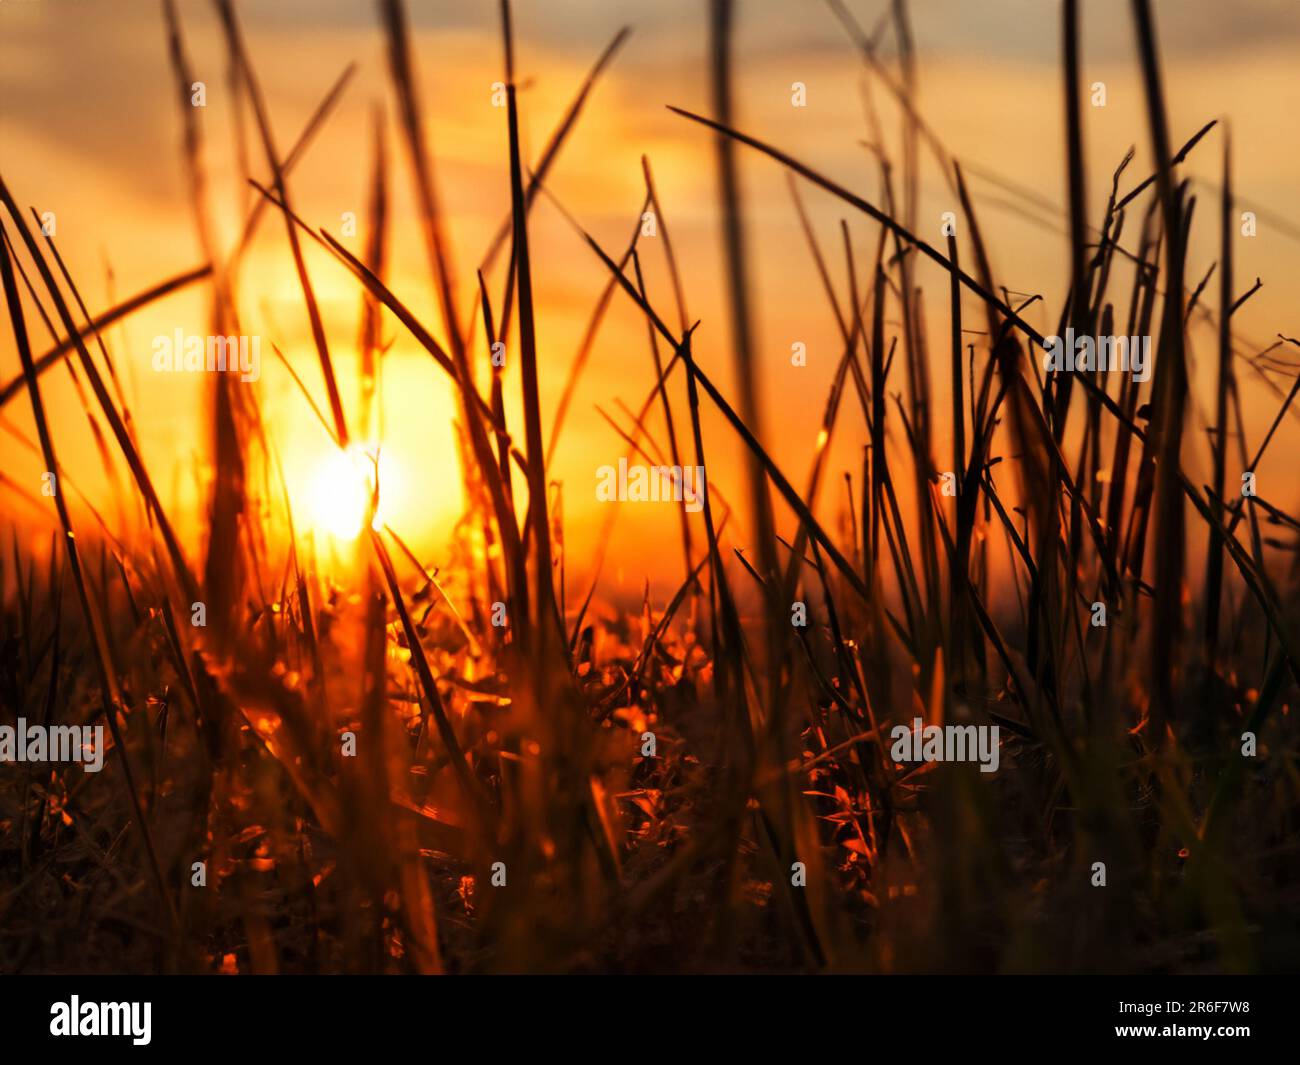 the sun is setting over a field of tall grass with tall grass in the foreground. . Stock Photo